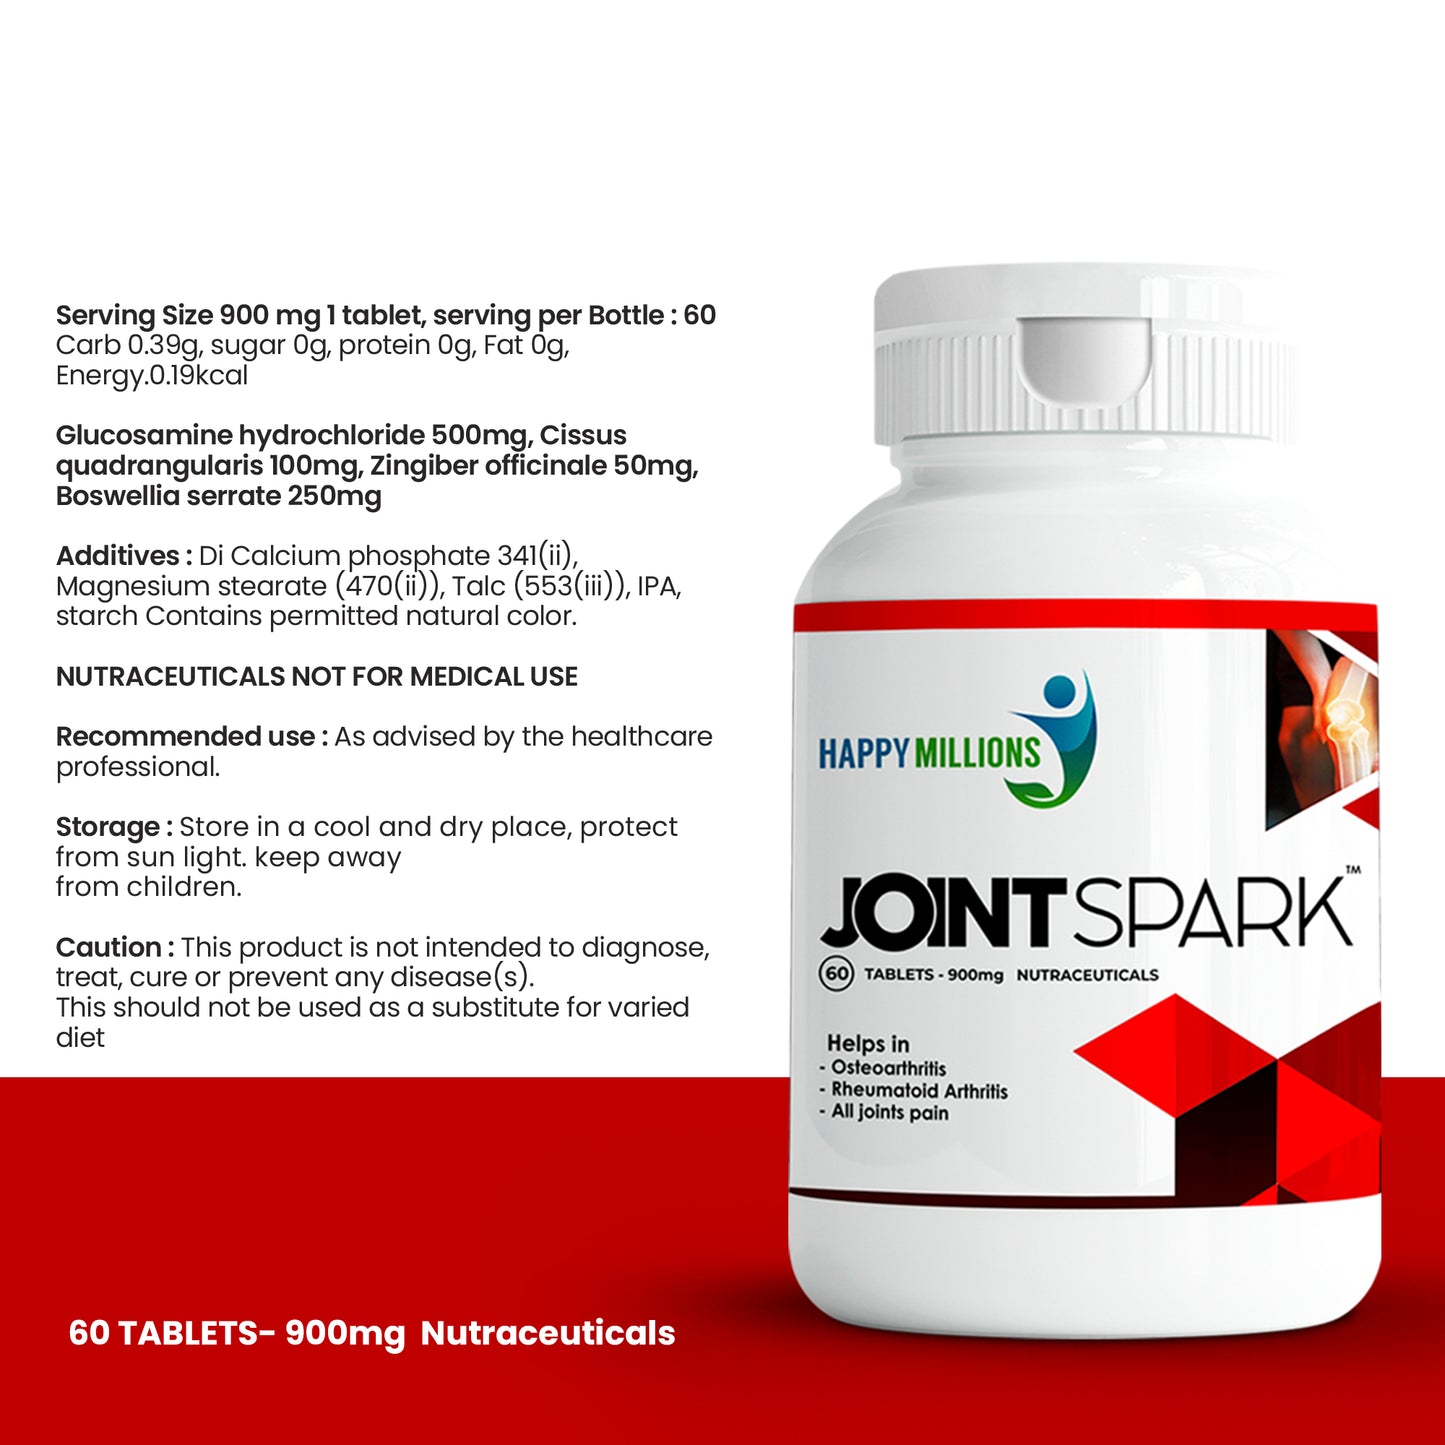 Ayurvedic Supplement JointSpark - Get Relief From Pain | 60 + 60 Tablets